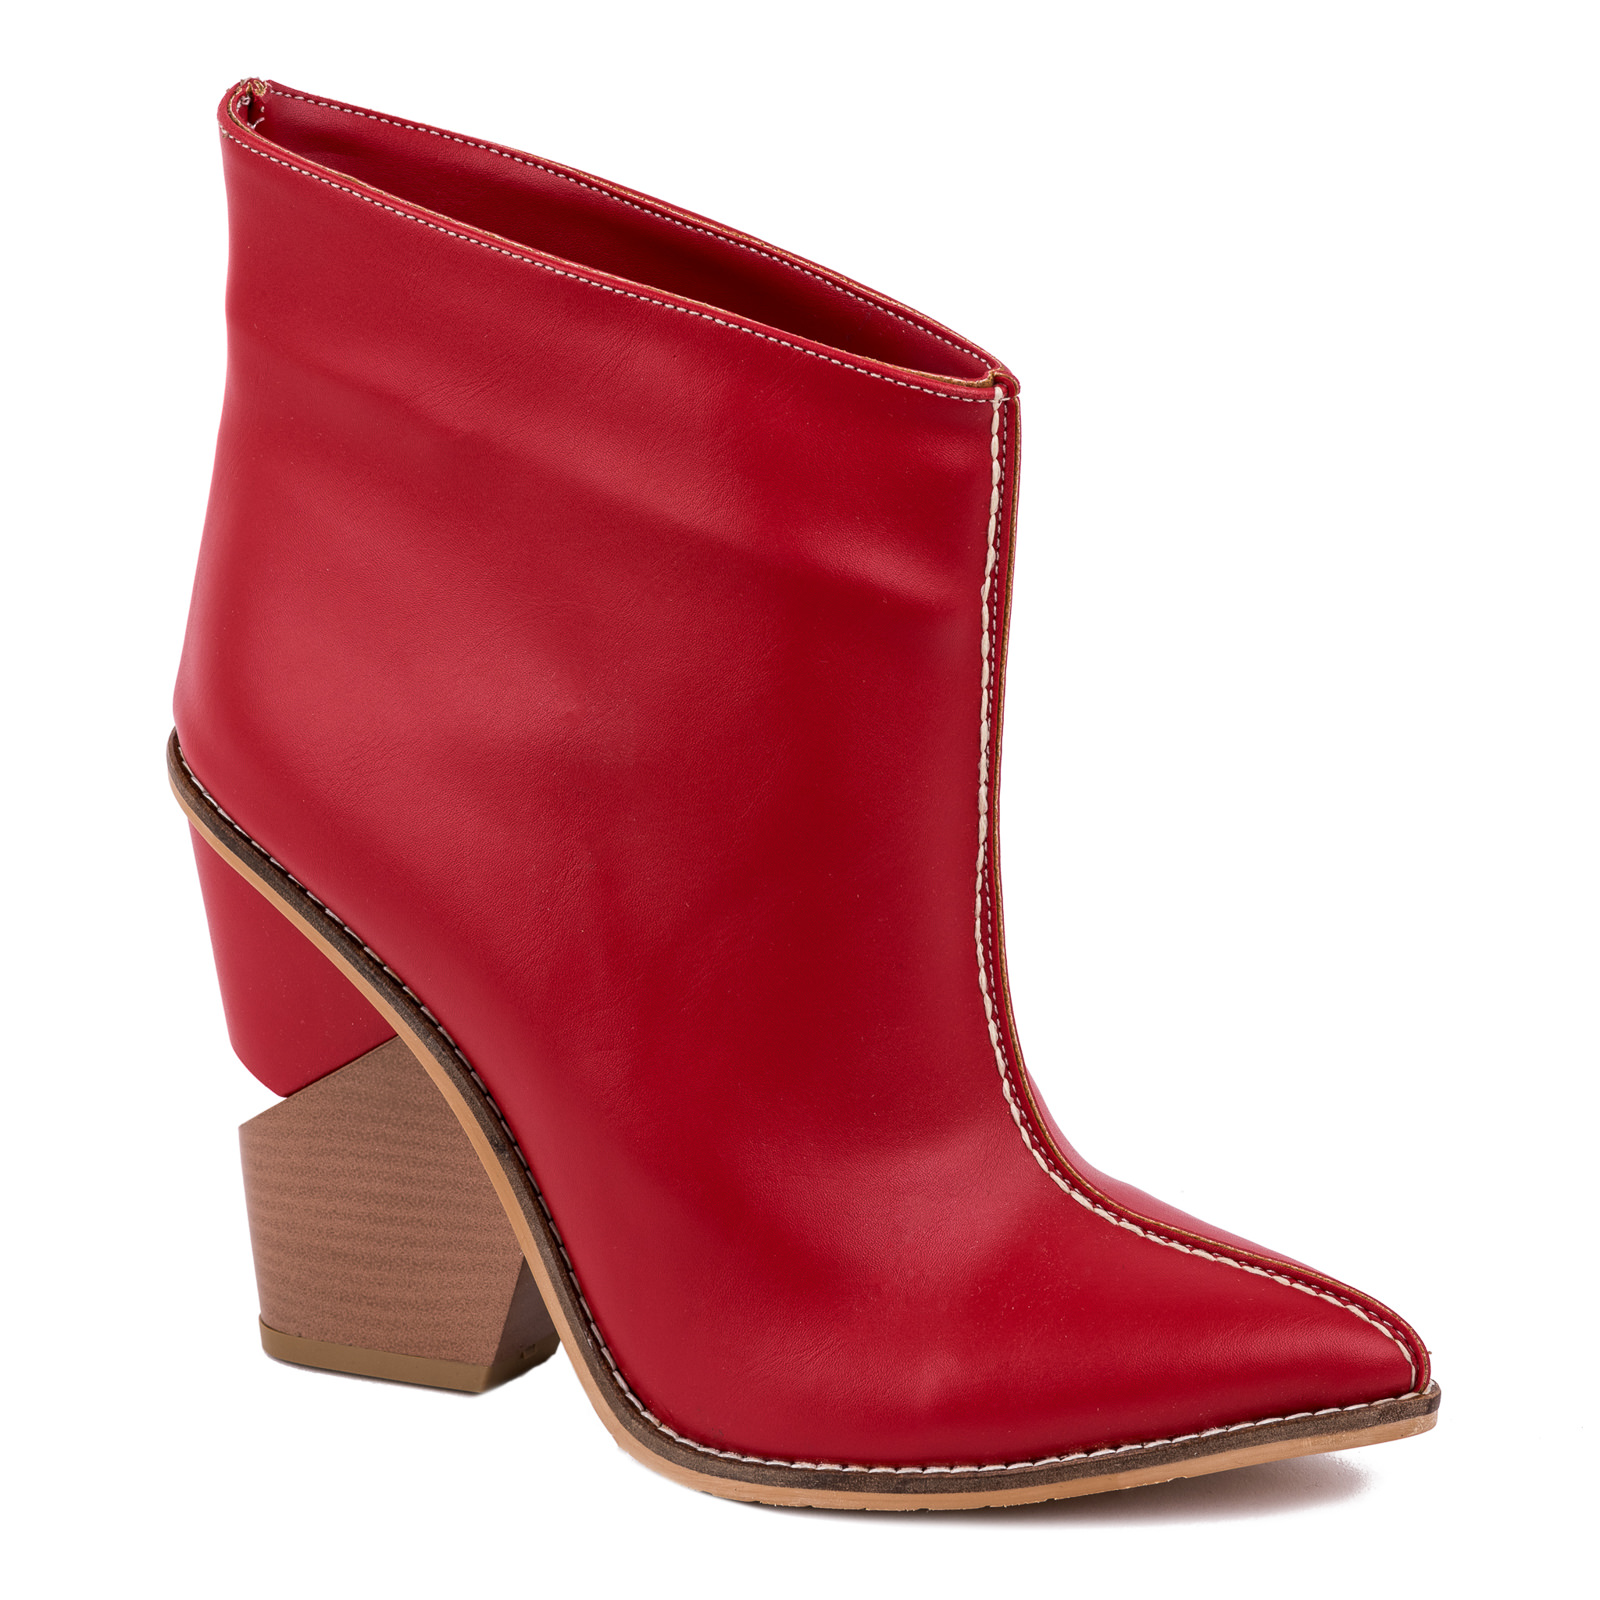 POINTED ANKLE BOOTS WITH THICK HEEL - RED